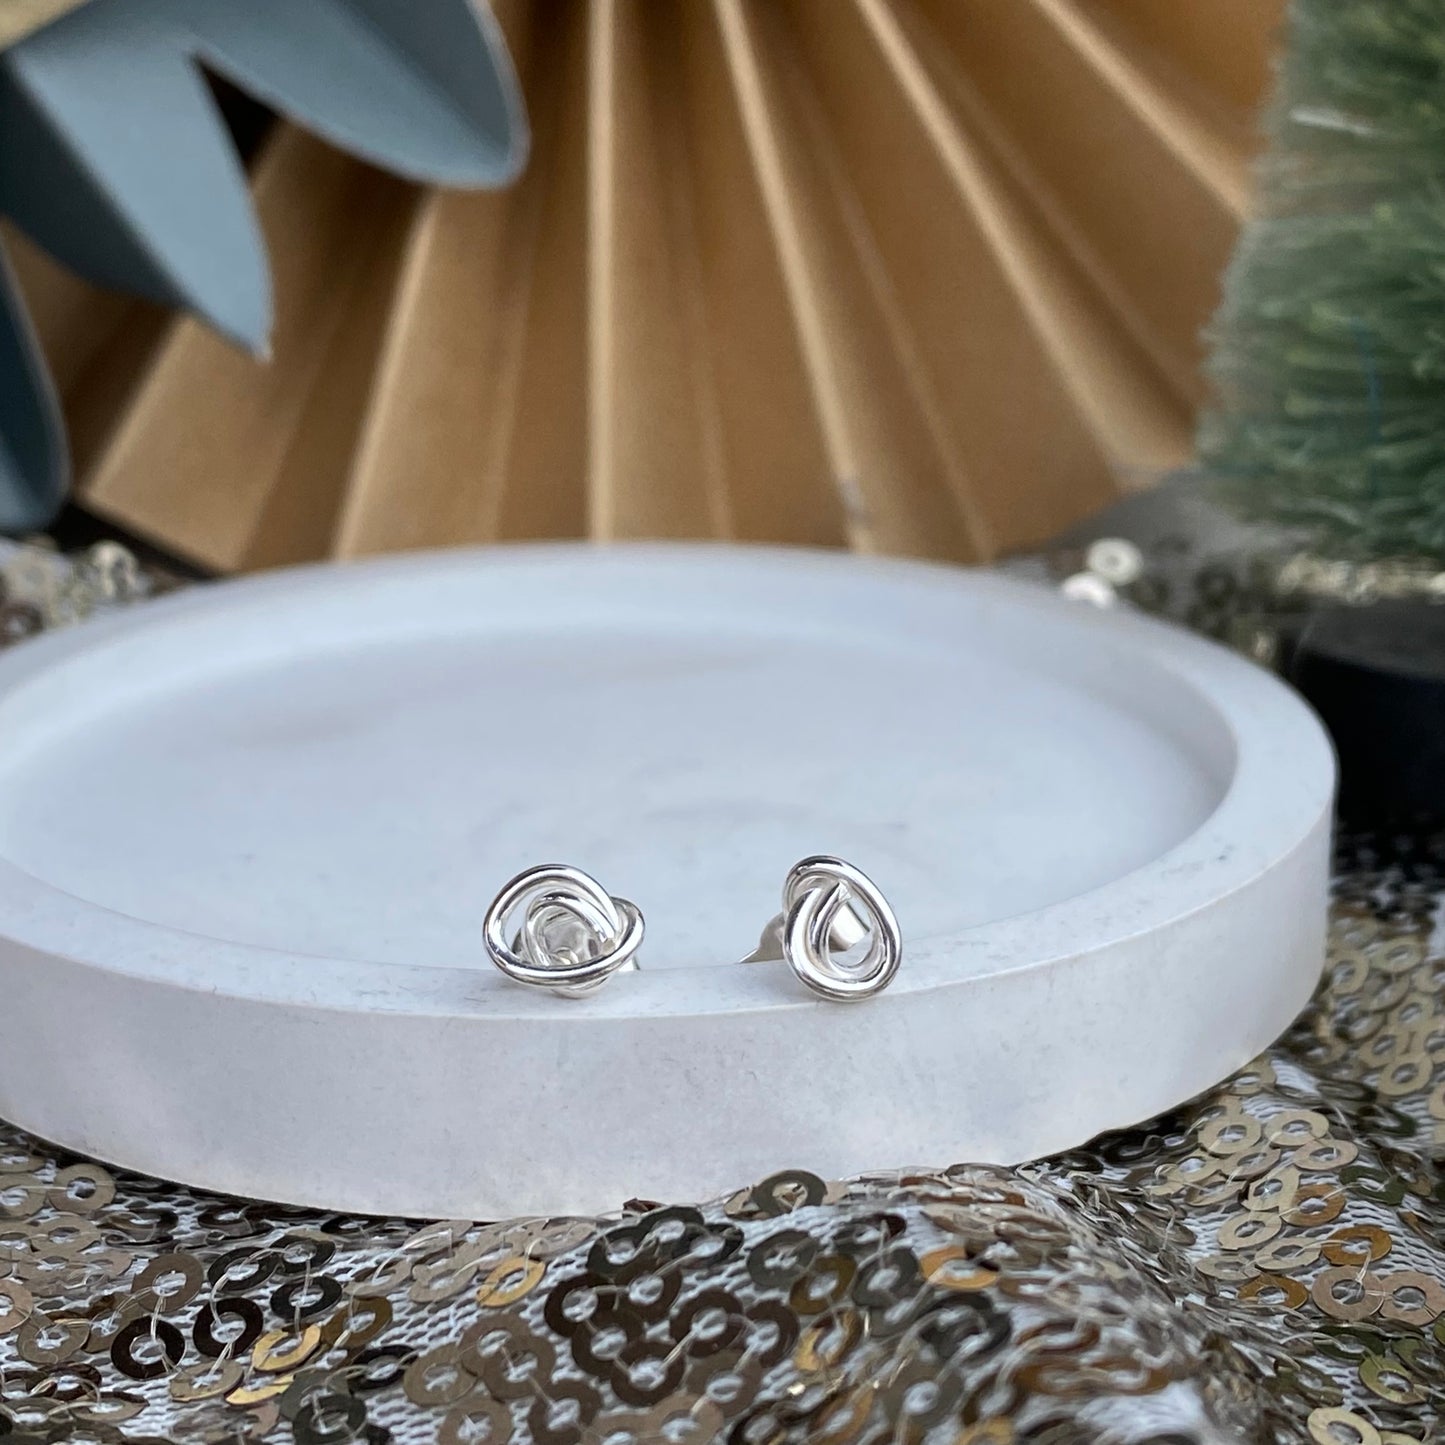 Day 1 - 5 Days of Christmas - sterling silver twist studs